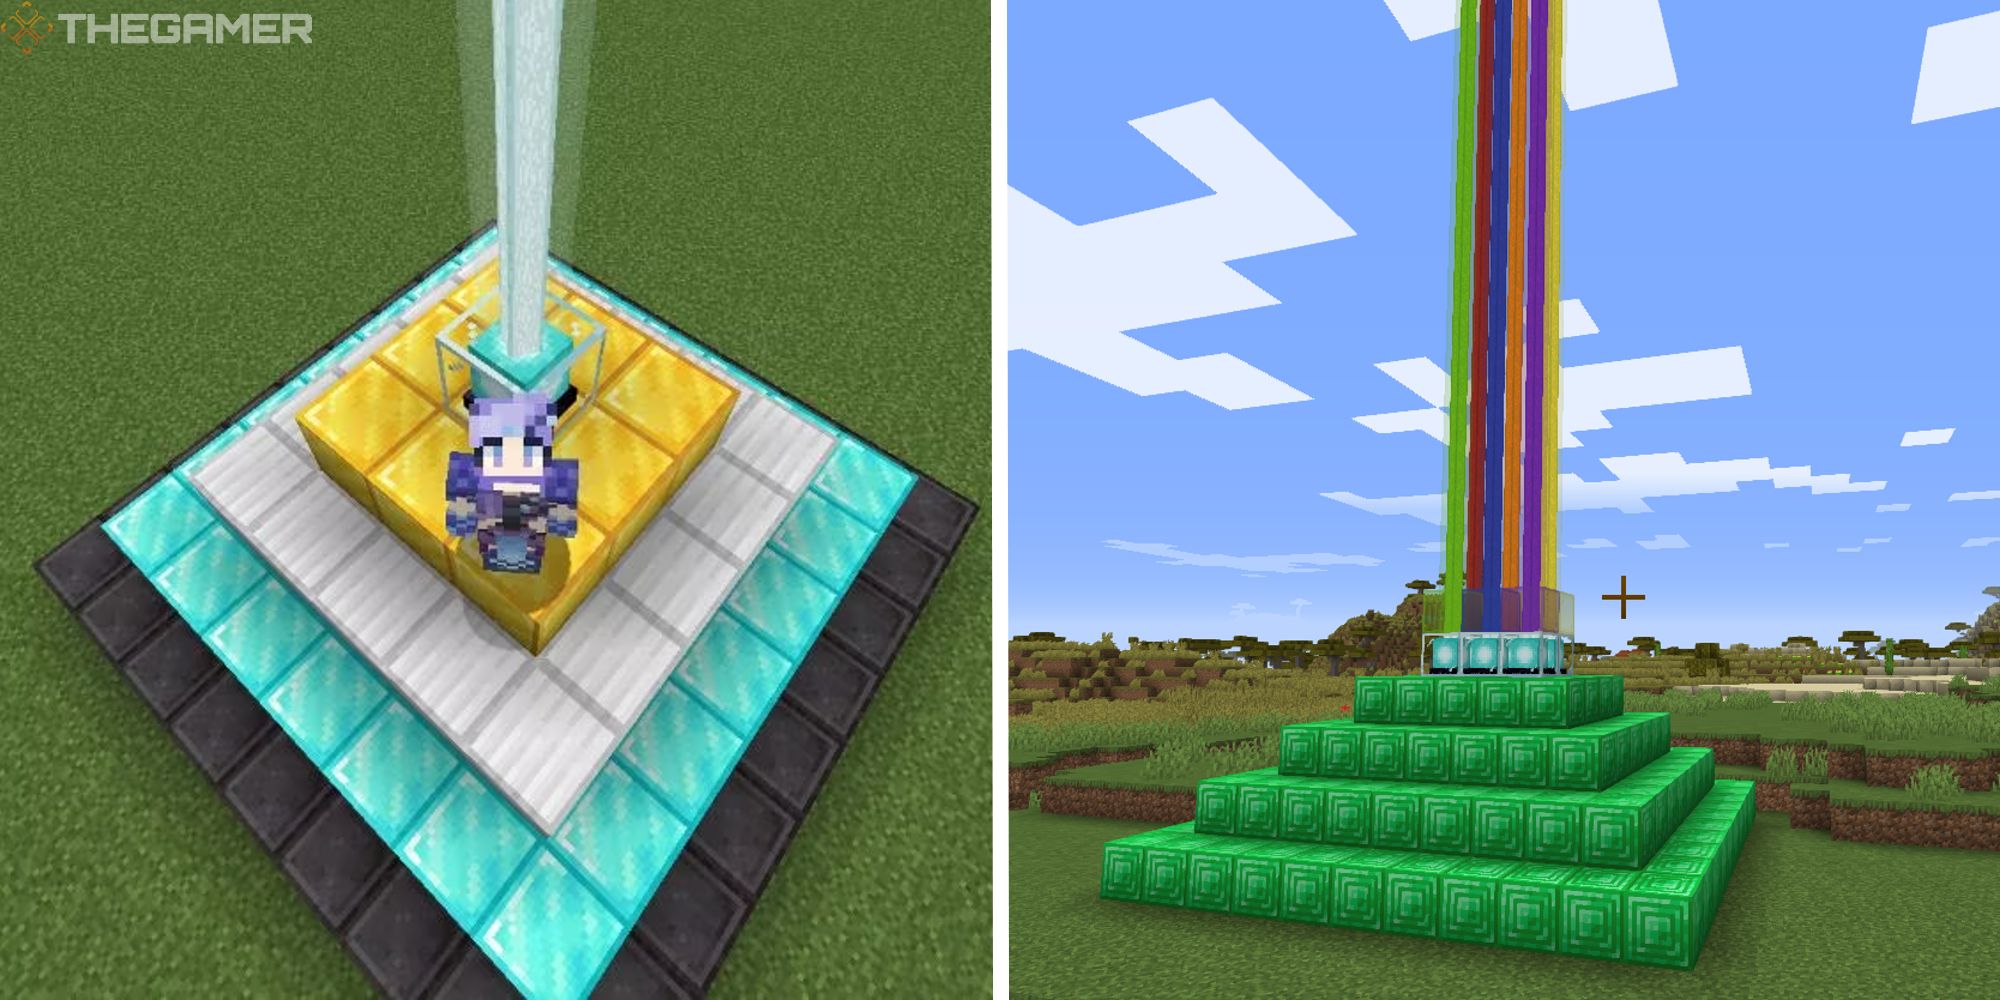 How To Make A Beacon In Minecraft